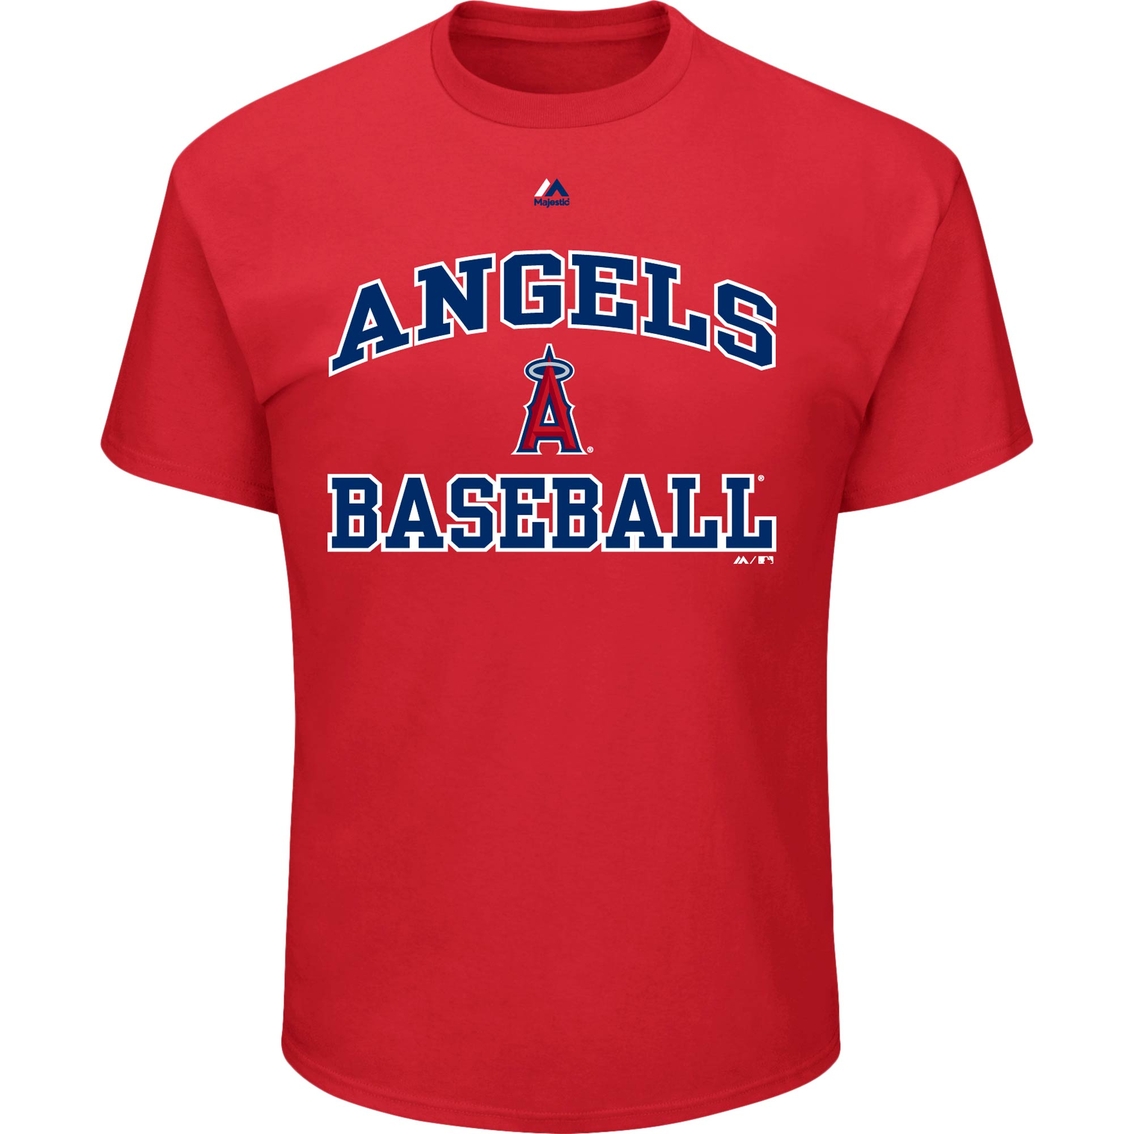 Majestic Athletic MLB Los Angeles Angels Heart and Soul Tee - Image 2 of 3